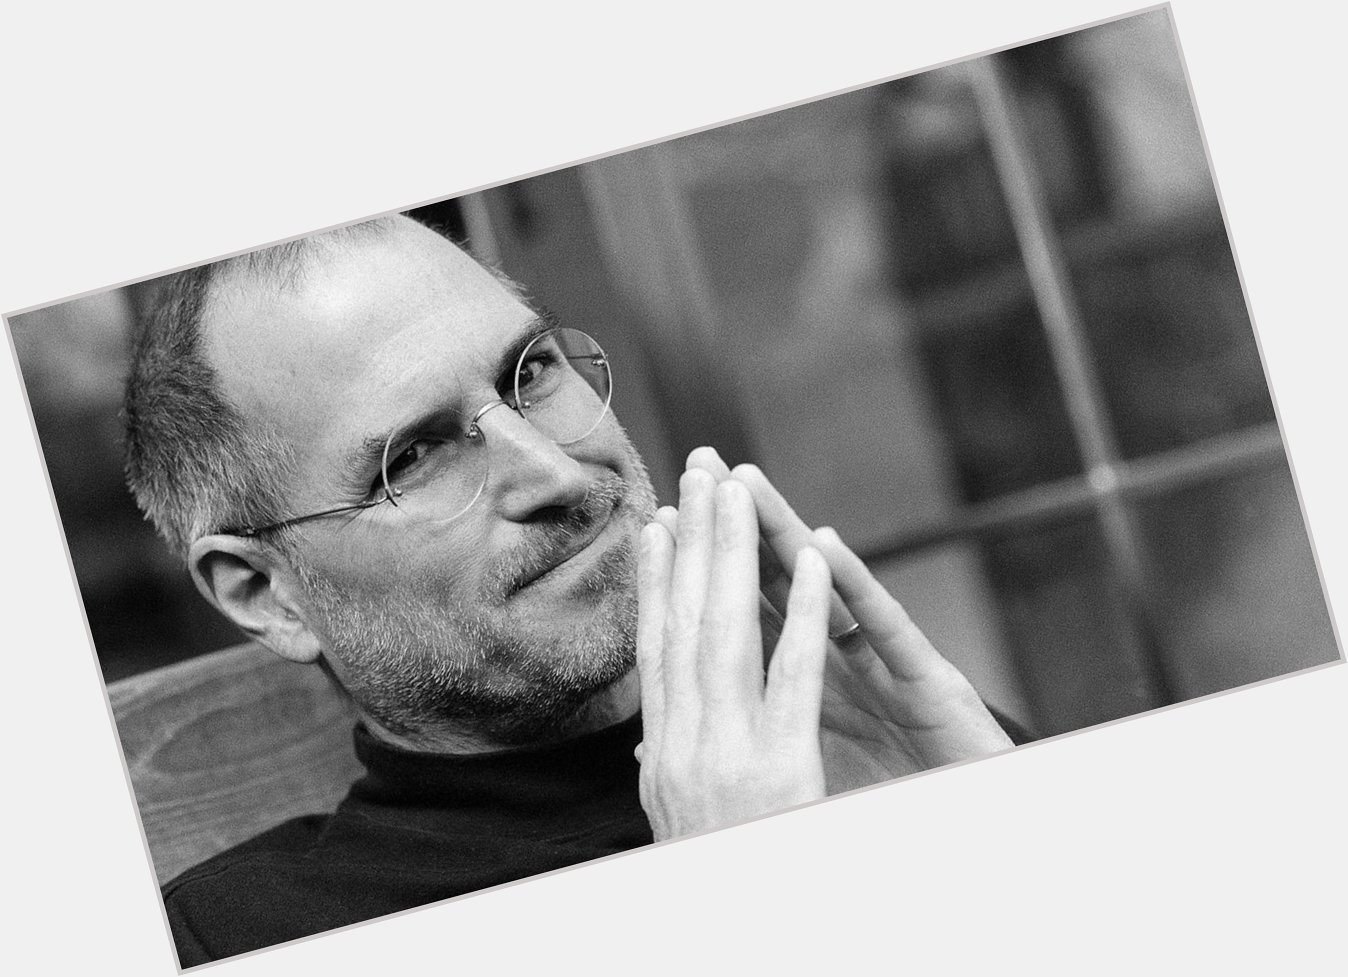 WE MISS YOU, Steve Jobs! Happy birthday, sir - you are our inspiration today. 